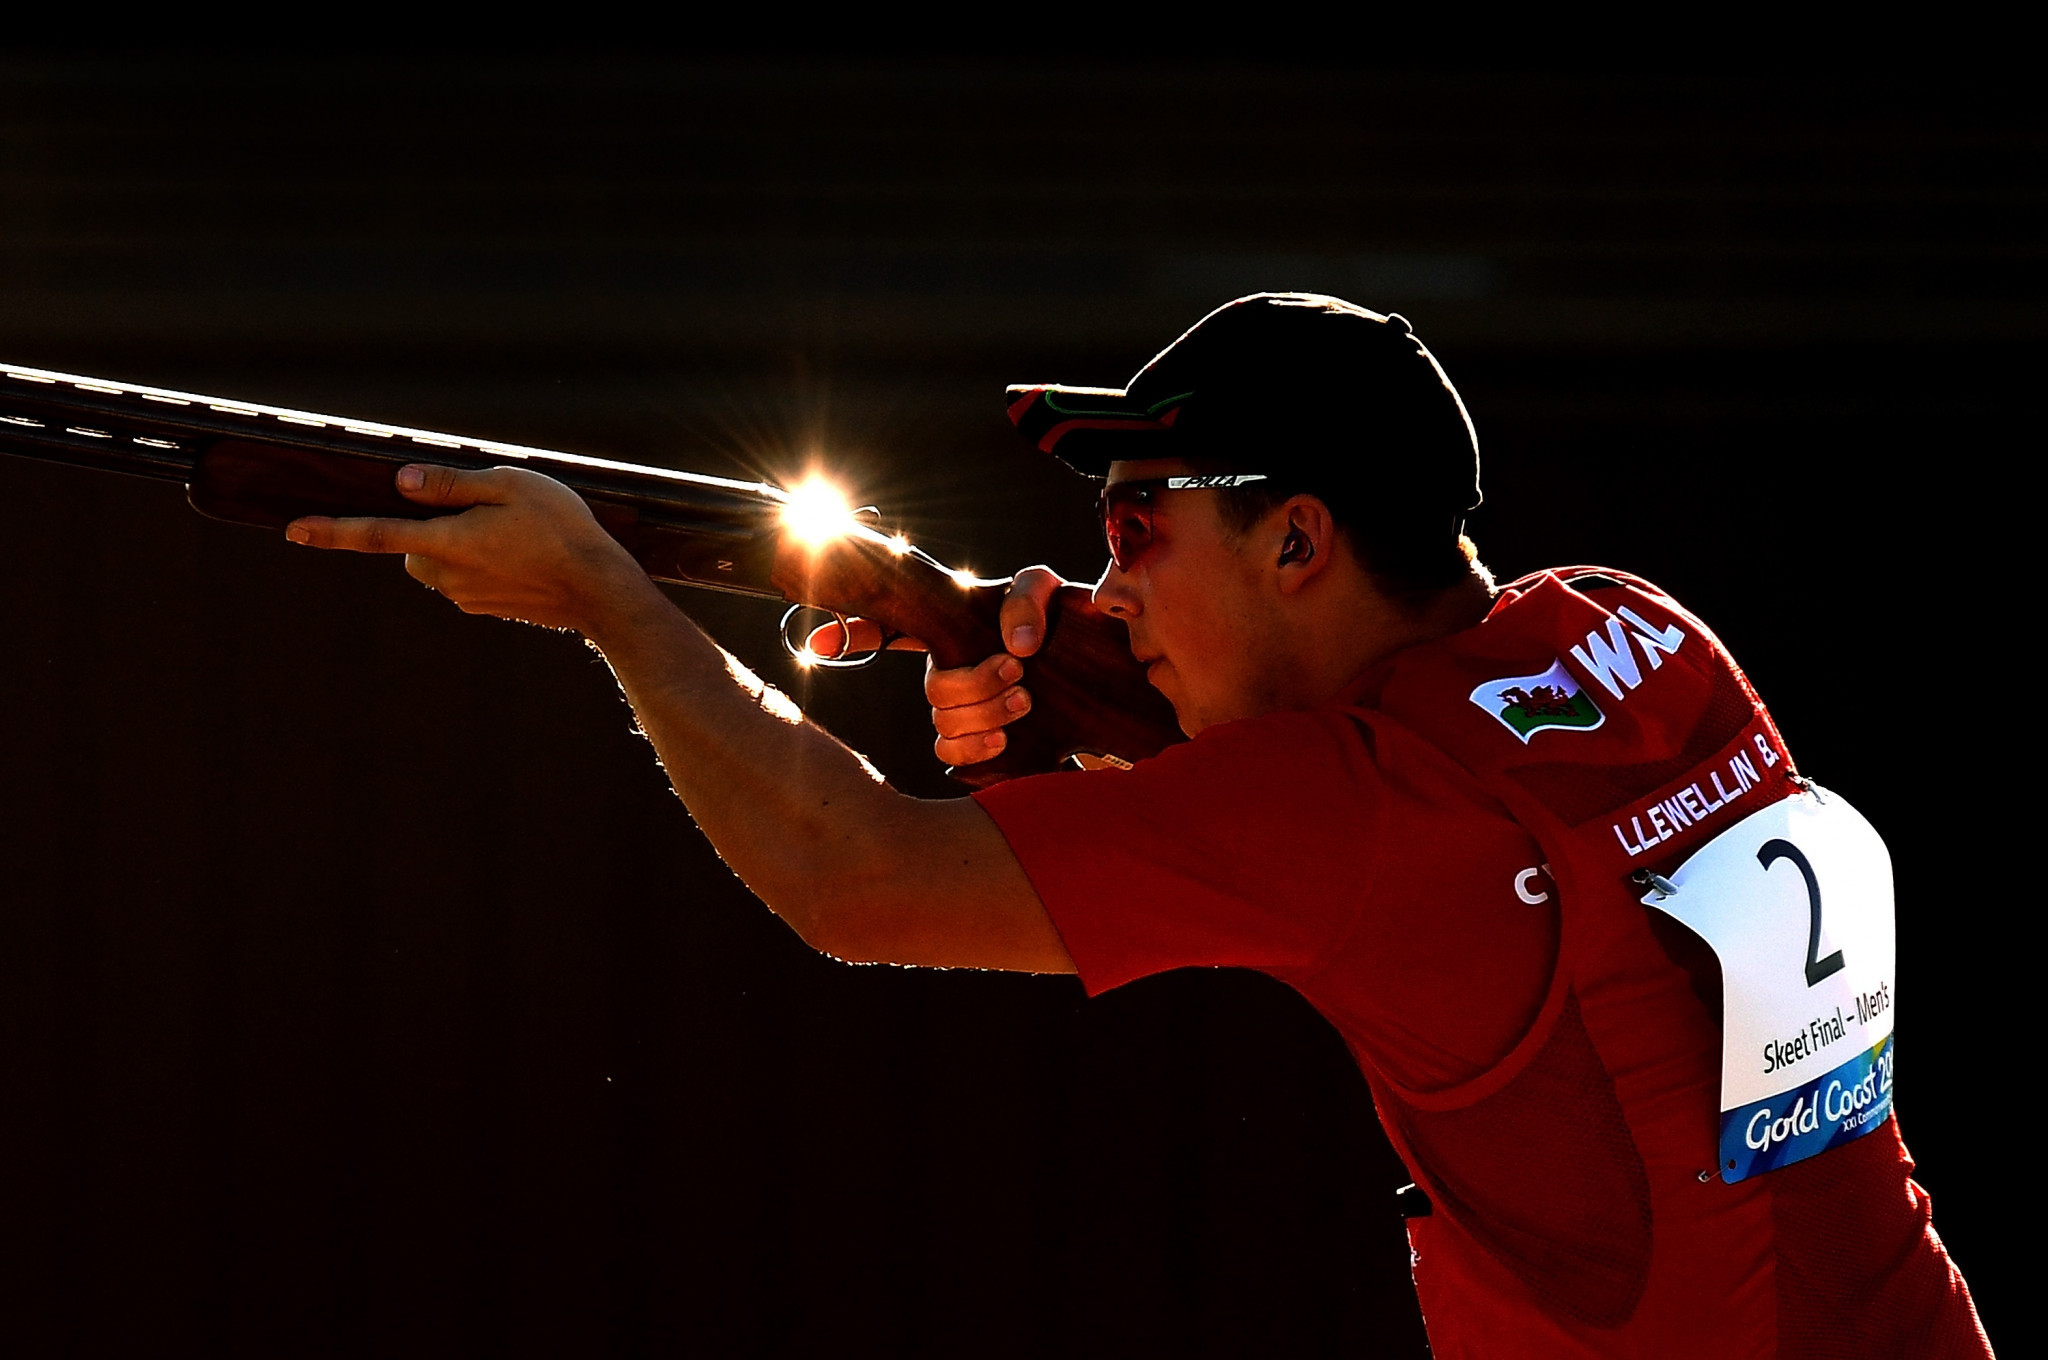 Three-way tie for lead after day one of men's skeet at ISSF Shotgun World Cup